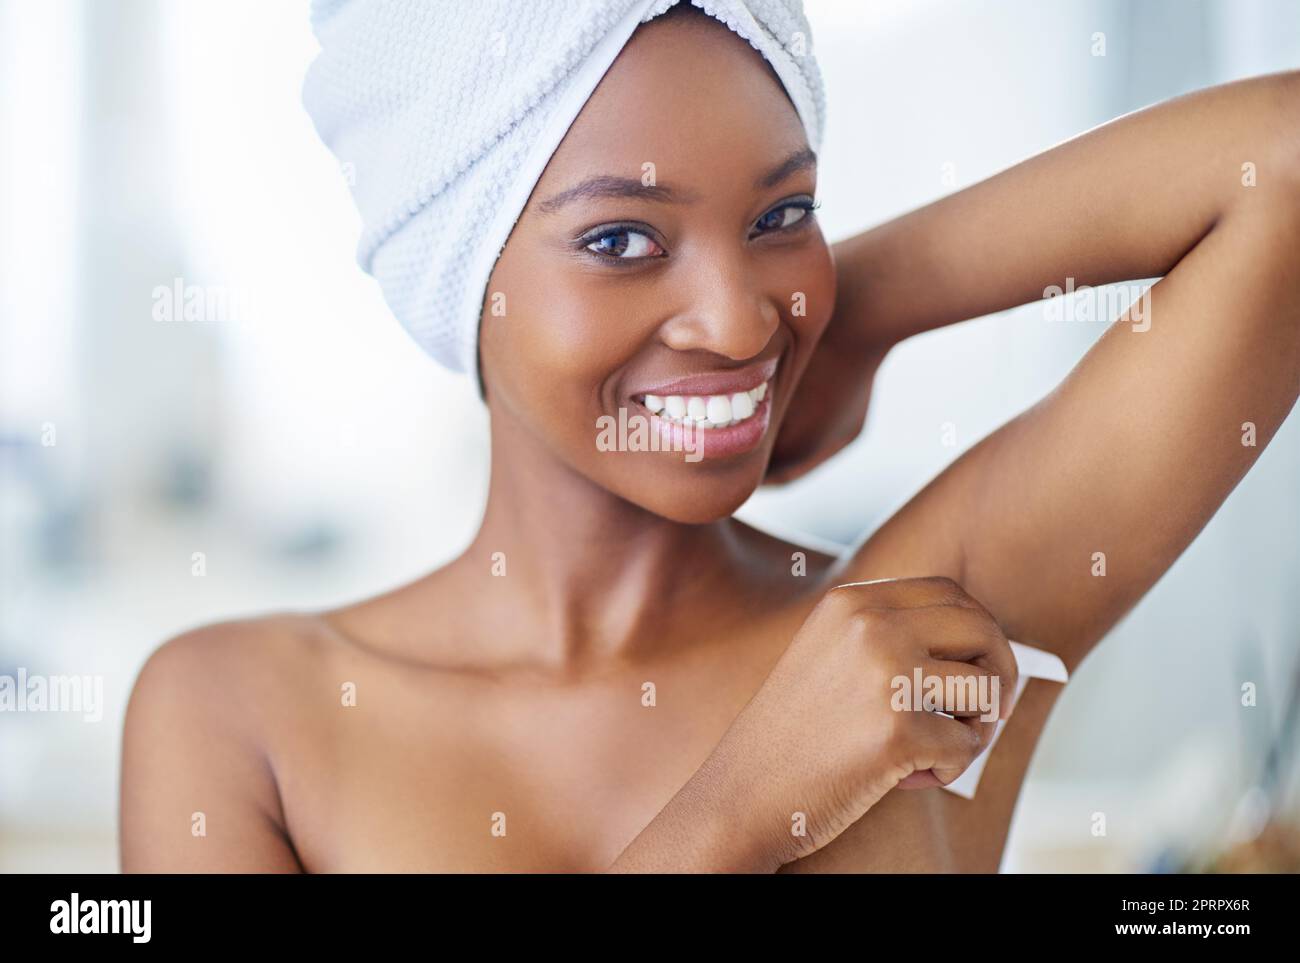 Waxing is so worth it. a beautiful young woman during her daily beauty routine. Stock Photo